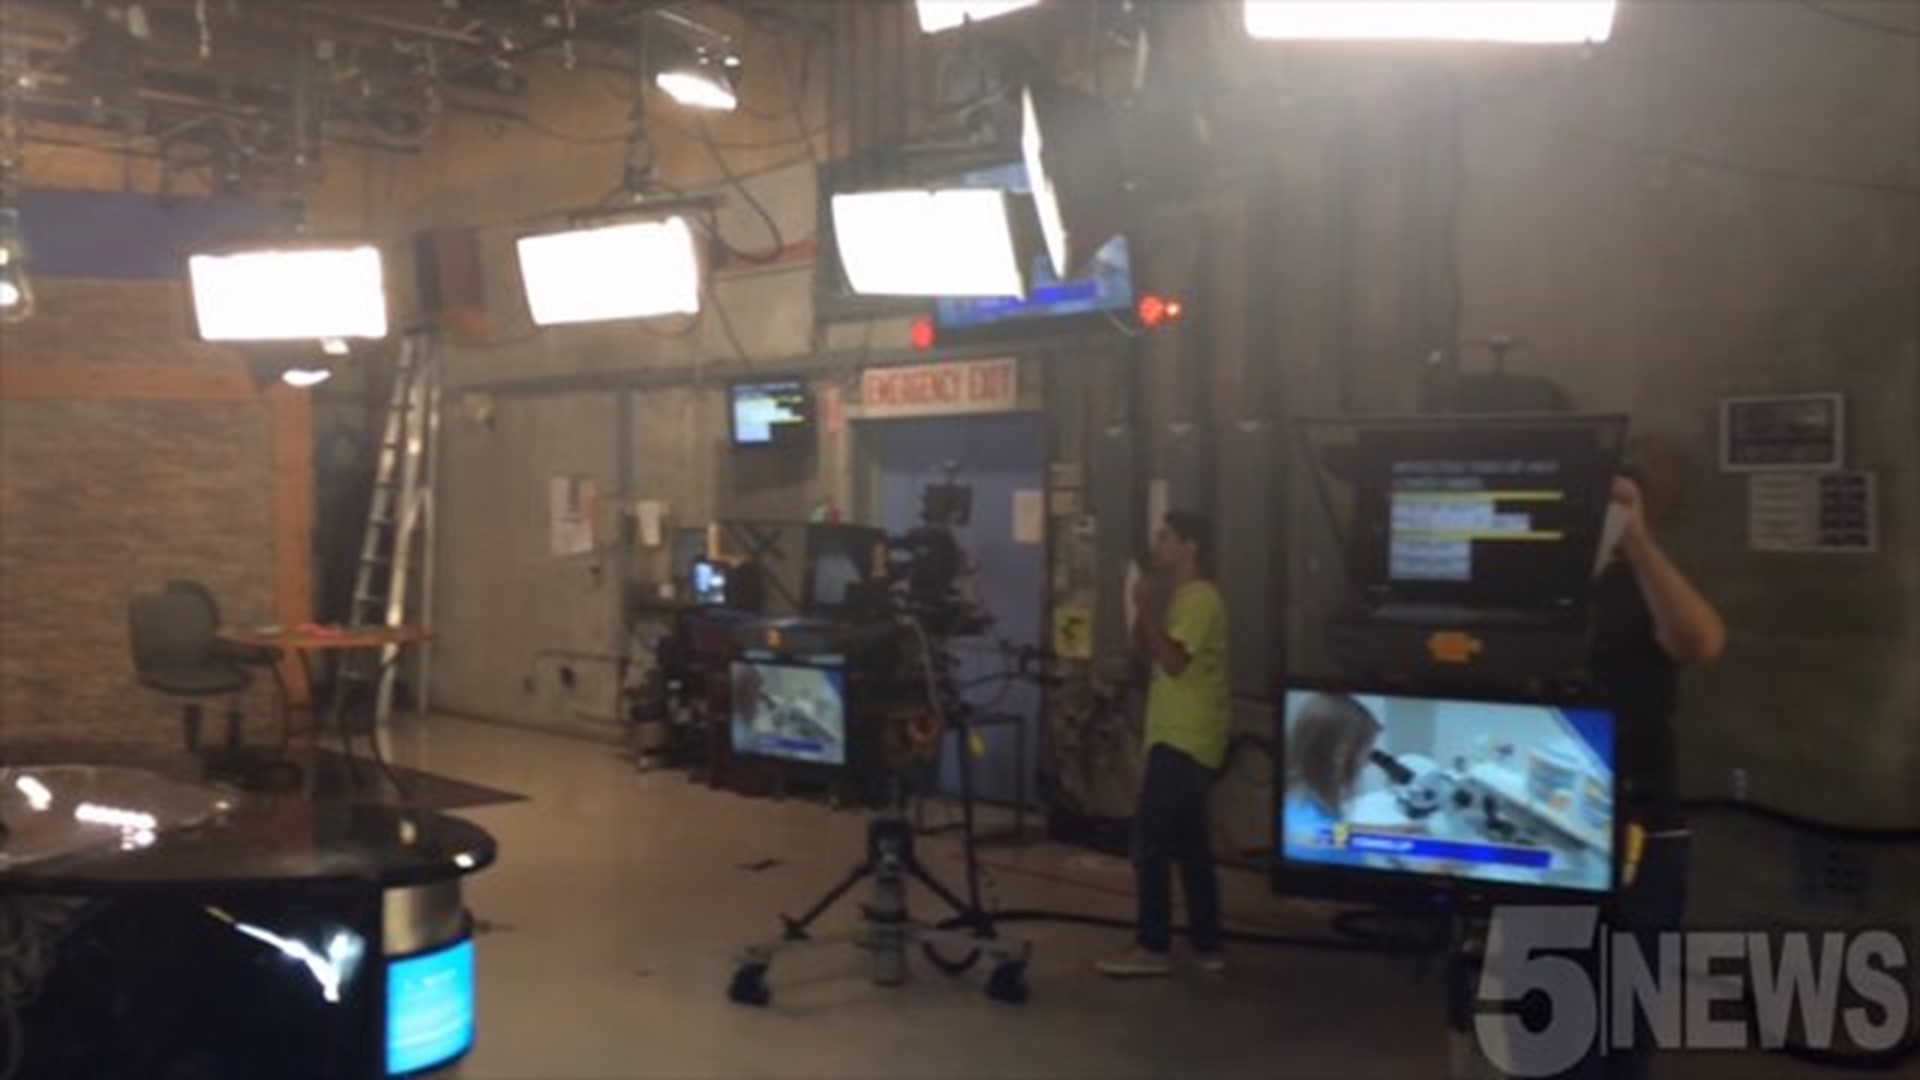 Inside a Commercial Break at 5NEWS